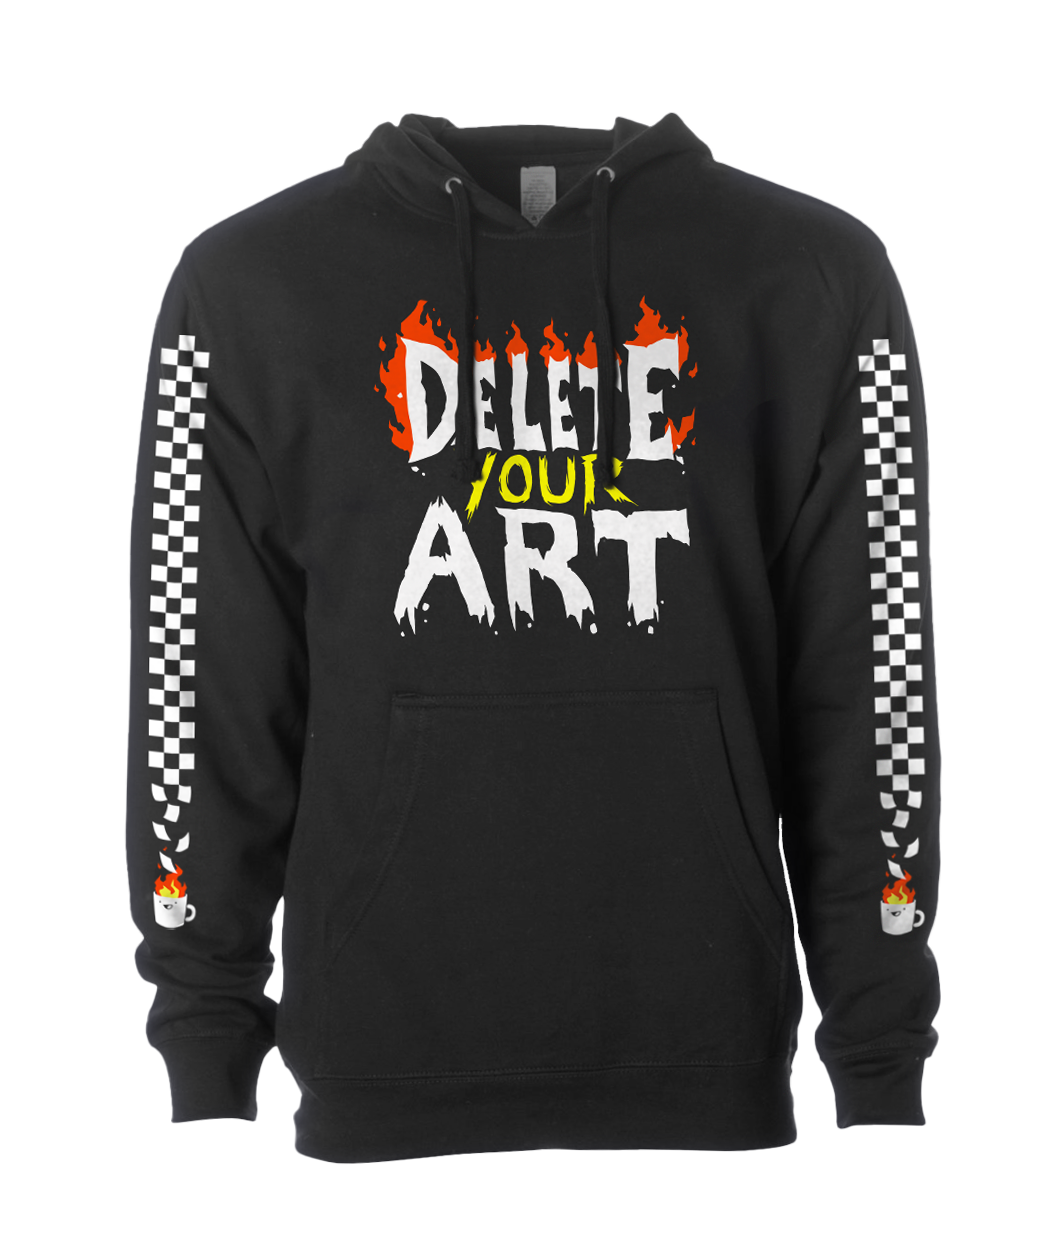 Black hoodie with "Delete Your Art" written across the front. Flames are coming out the top of the word "Delete". A checkered white pattern goes down the length of each sleeve with a flaming mug with the Drawfee logo at the bottom of each sleeve.  